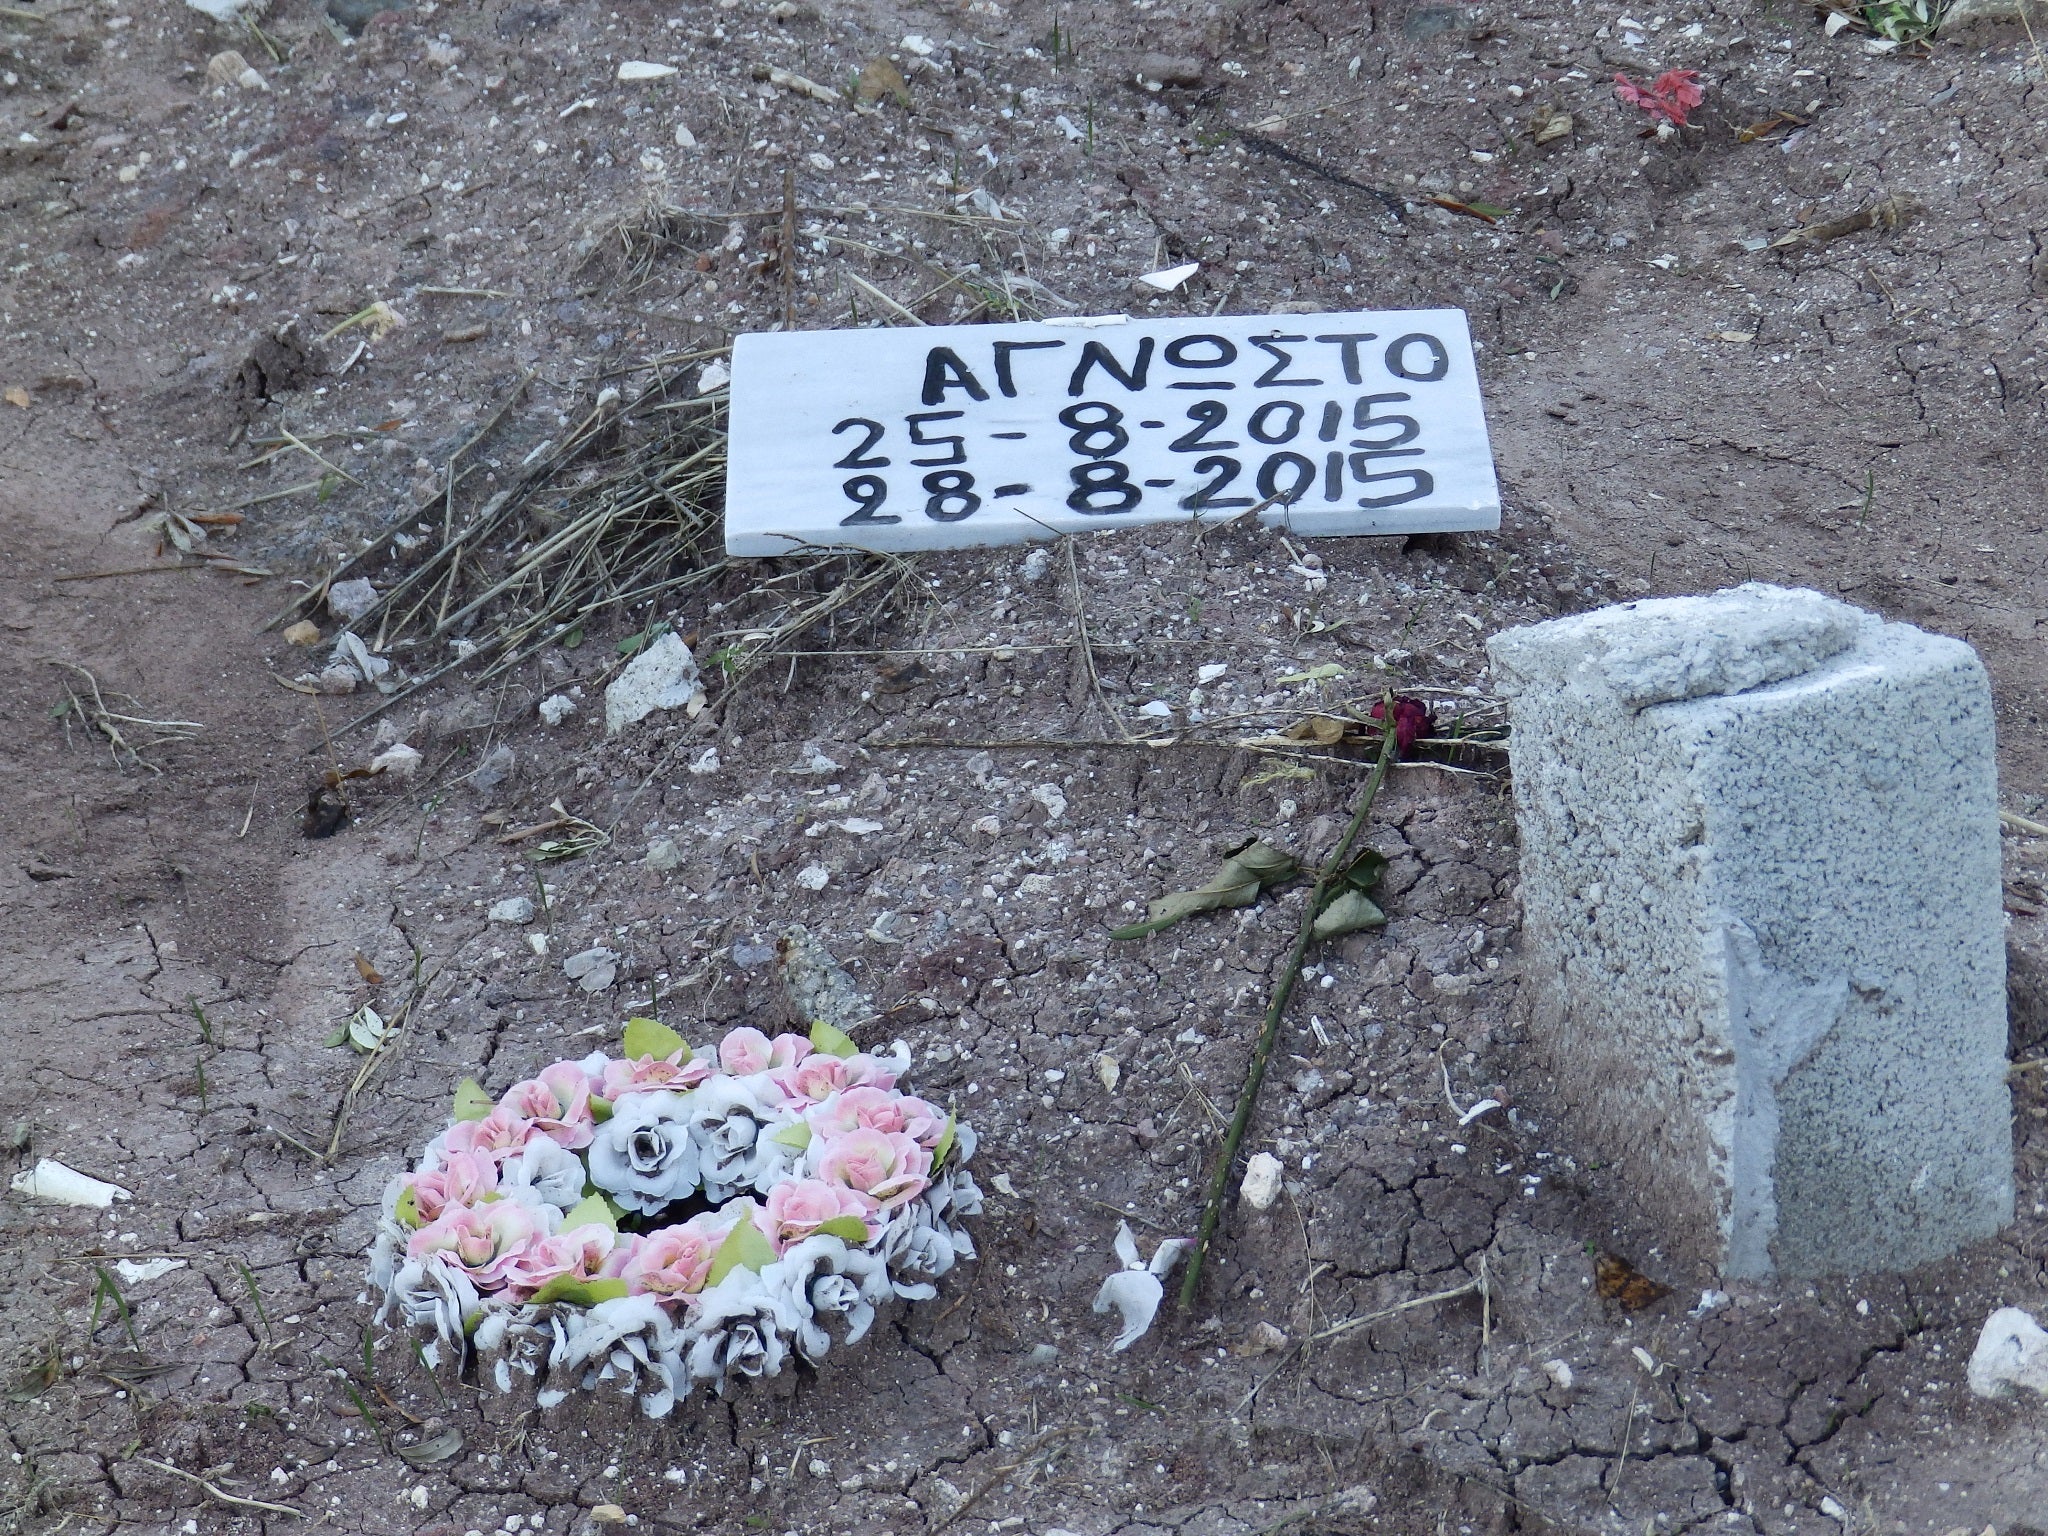 Some bodies have been buried together because of lack of room at the Agios Panteleimonas cemetery in Mytilene, Lesbos.